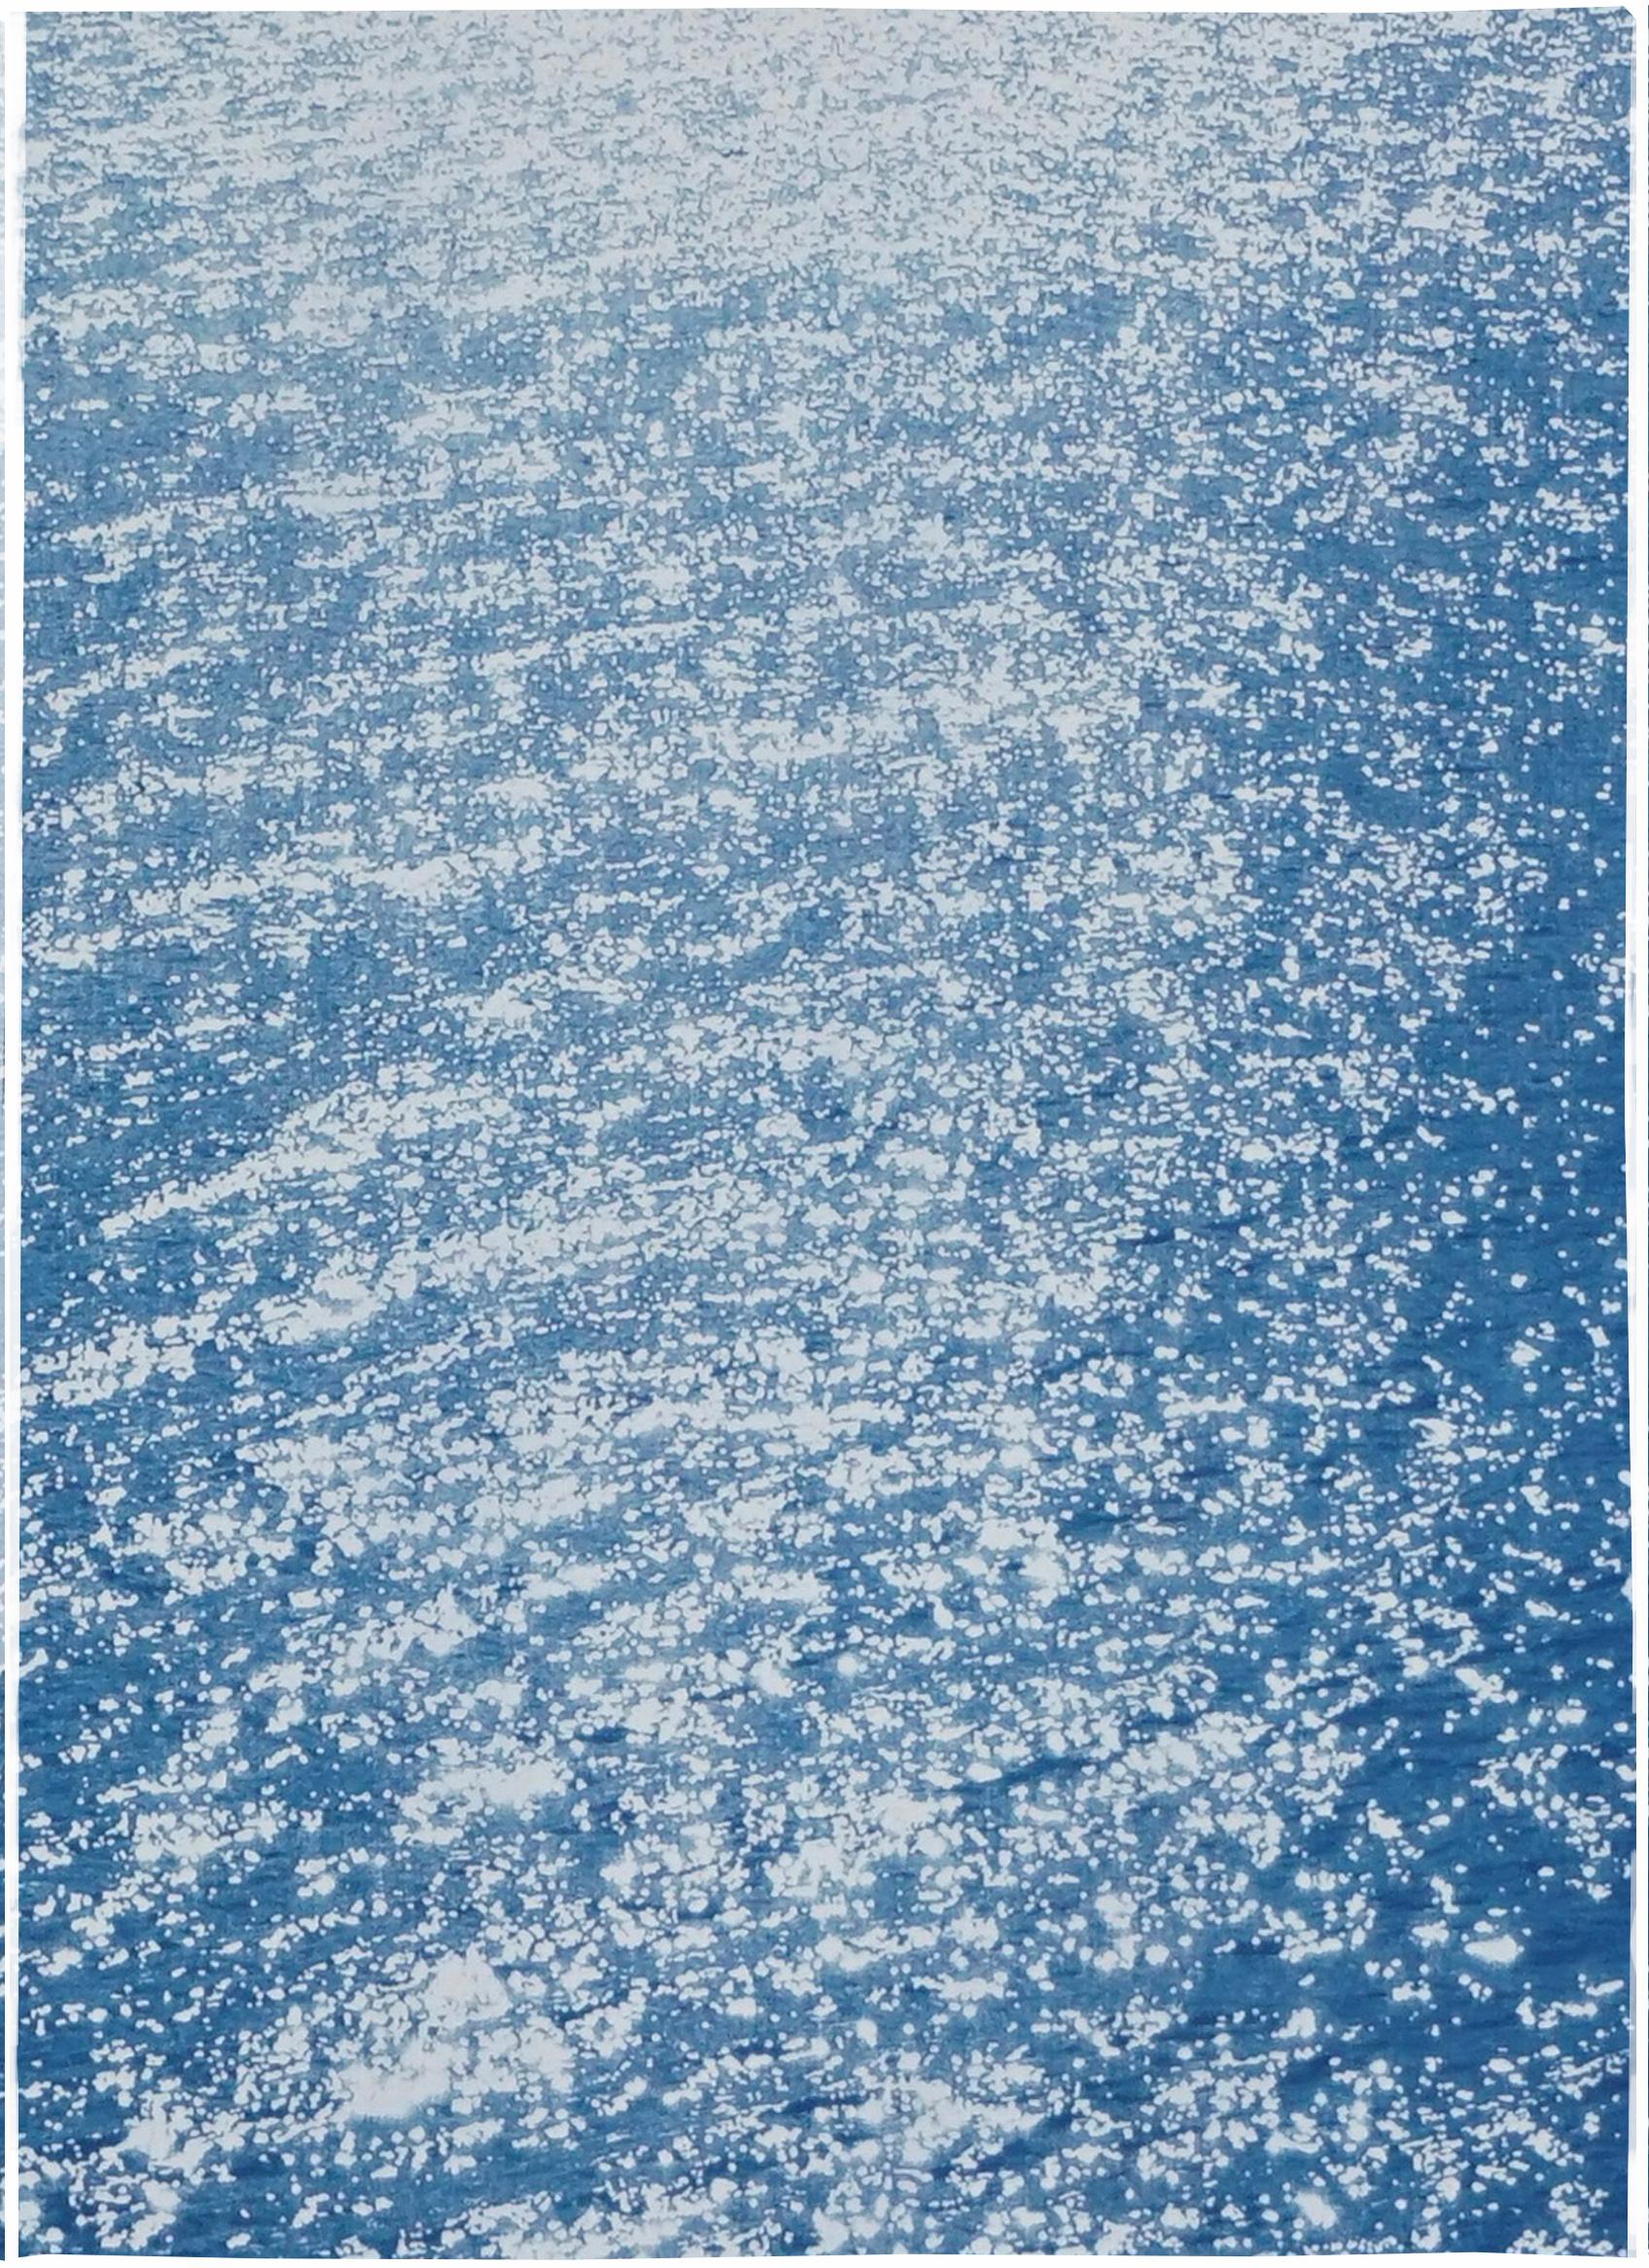 This is an exclusive handprinted limited edition cyanotype.
This beautiful triptych is called 